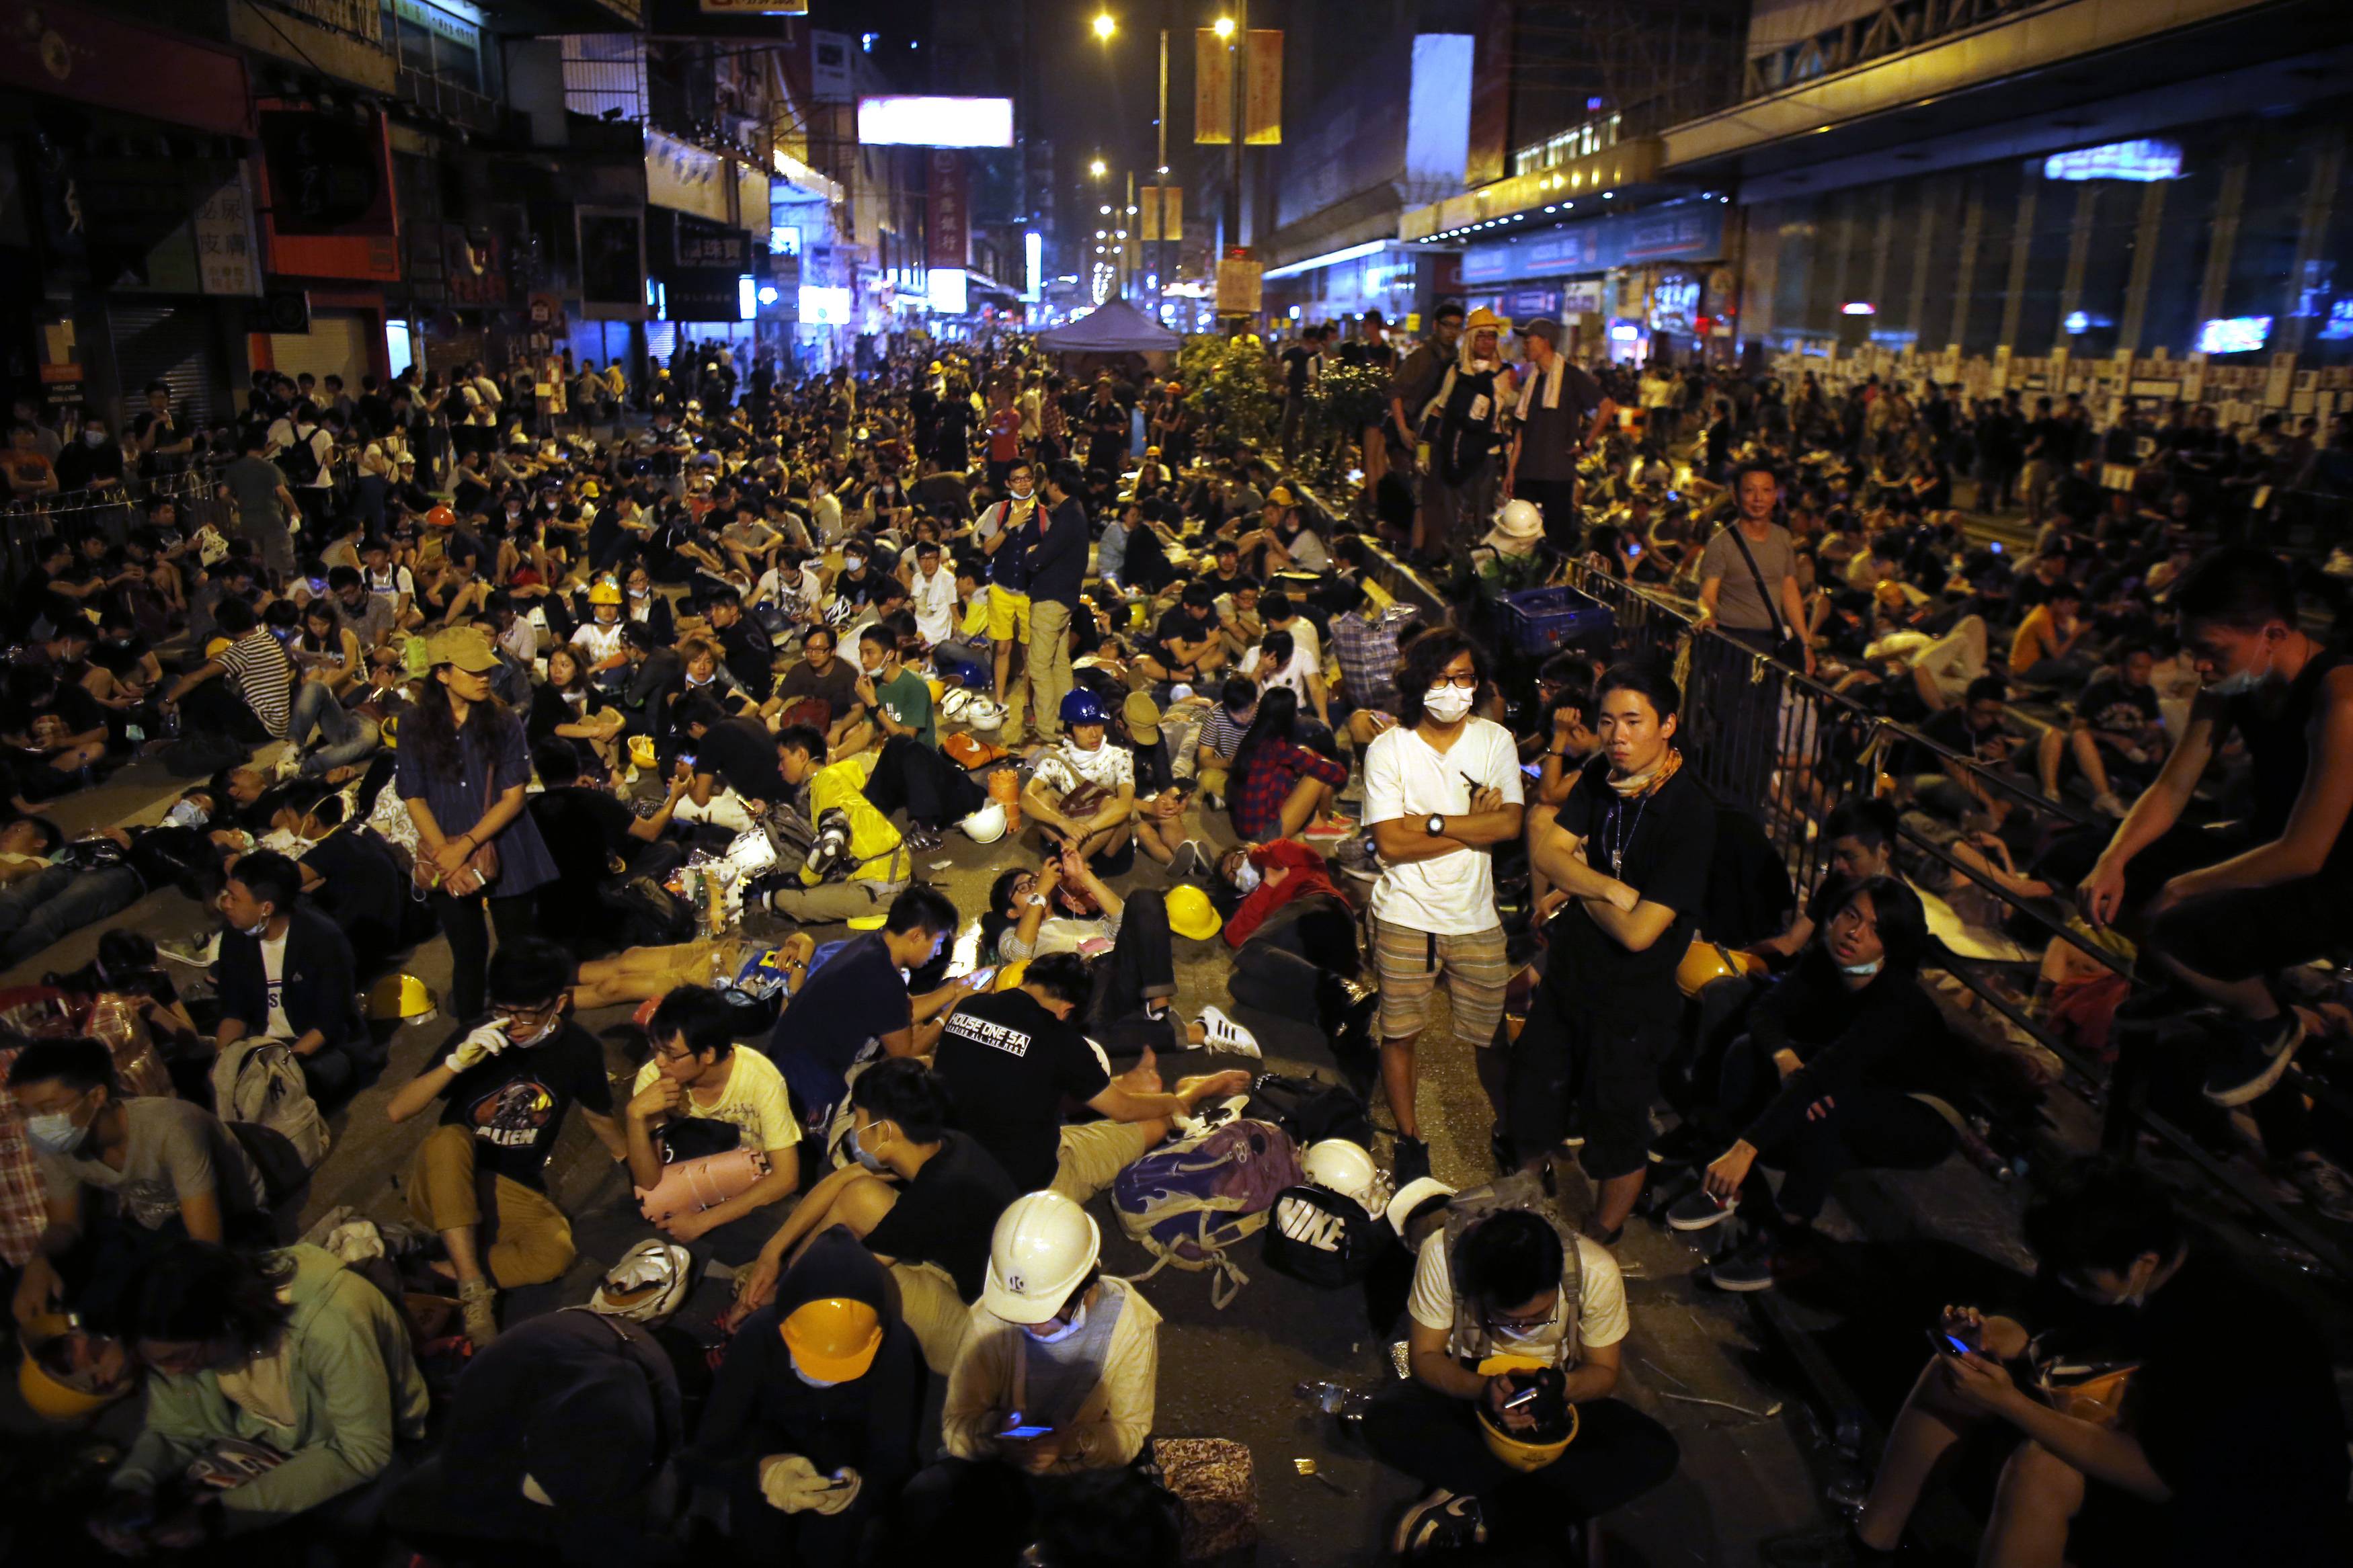 For Hong Kong Youngsters, Protests Bring Taste of Freedom